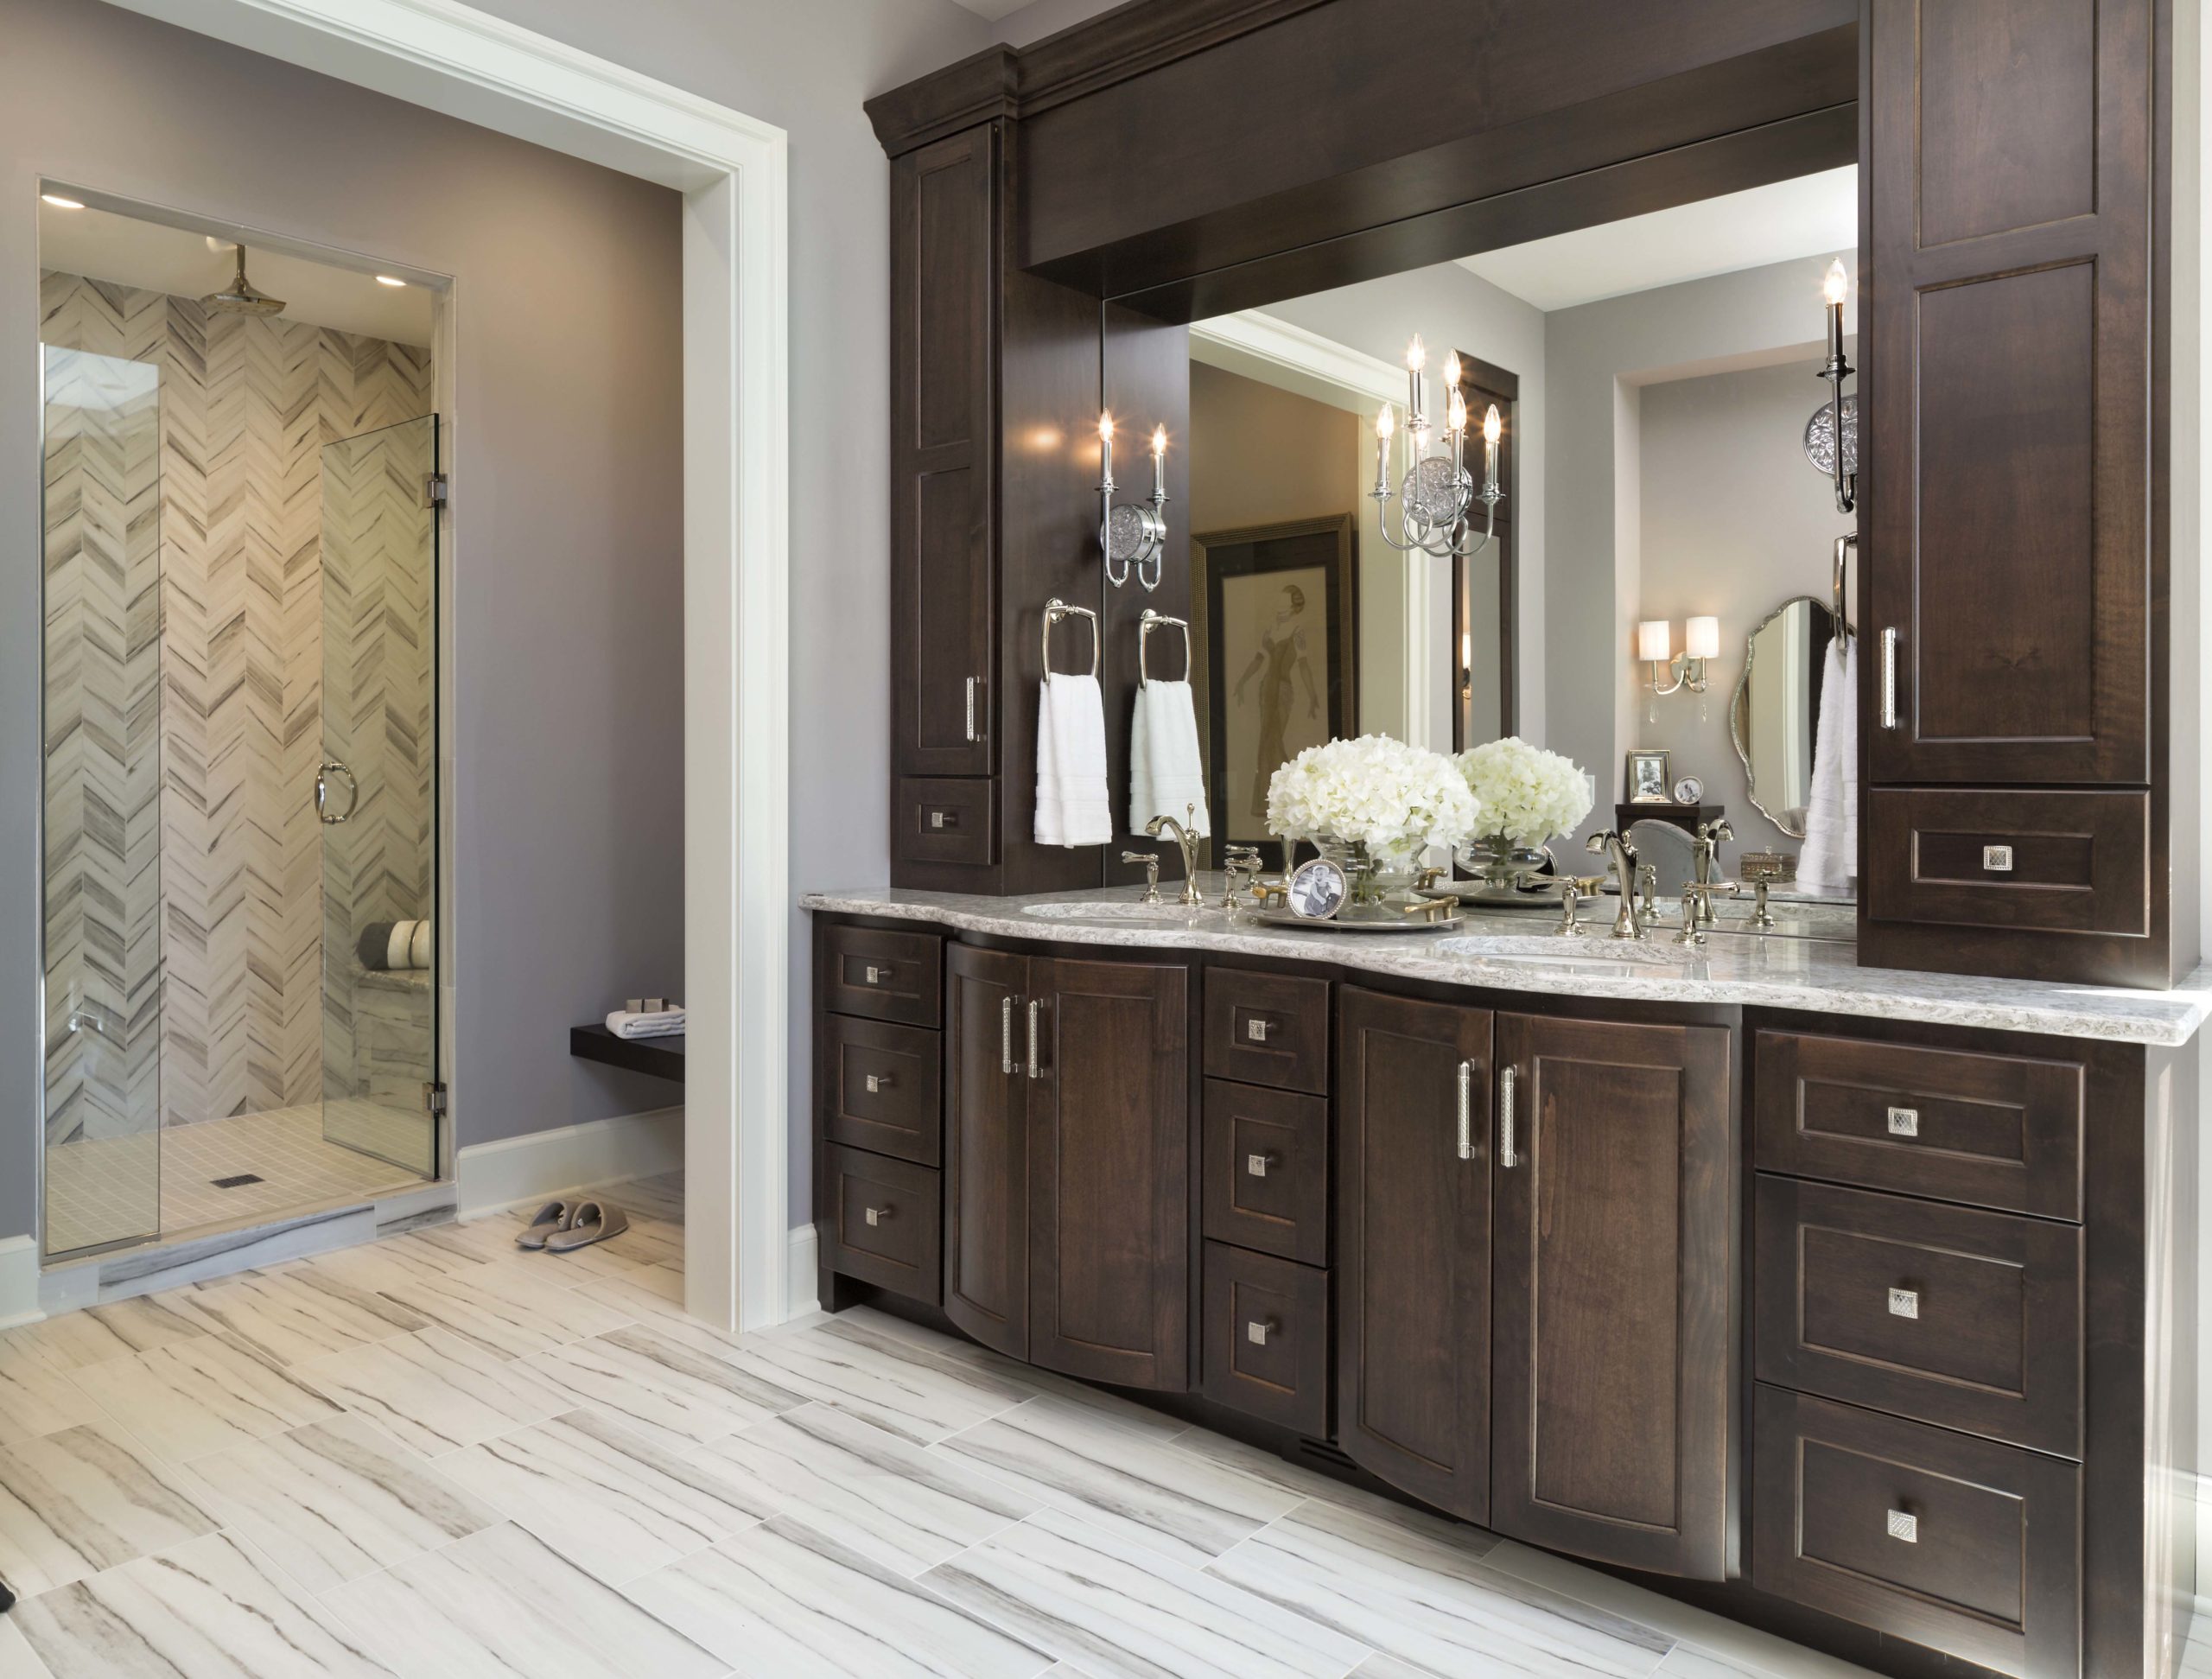 A bathroom with dark wood cabinets and marble counter tops.